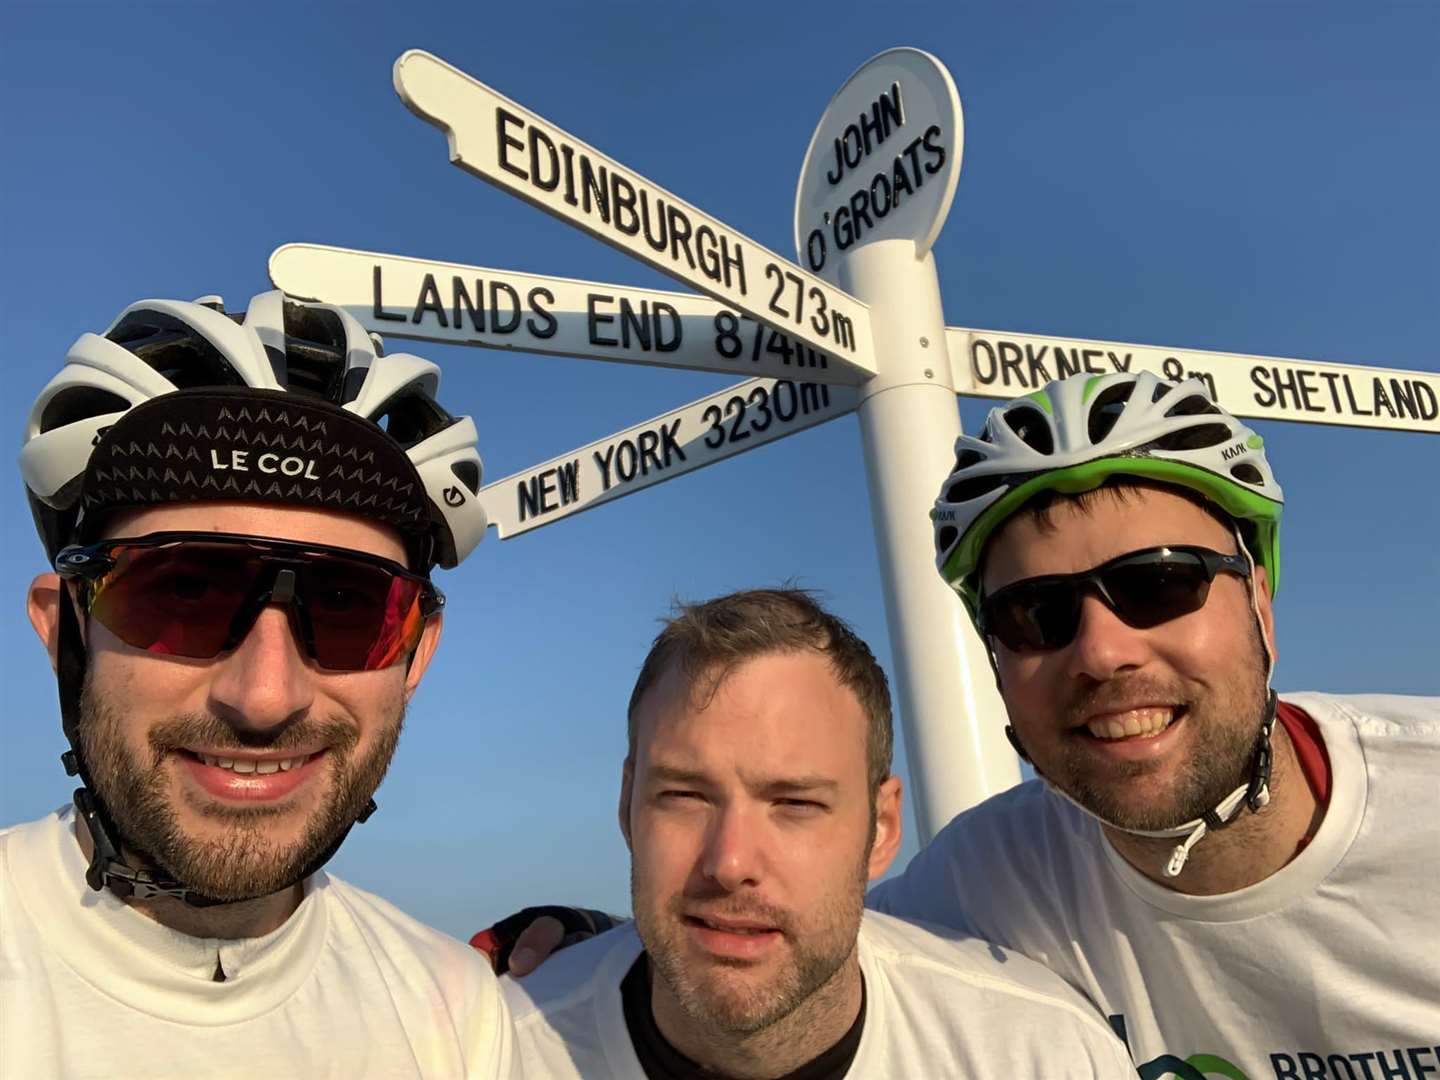 Charity cyclists Ian Johnston and Jamie Ritchie with support driver Callum Ritchie at John o' Groats on Wednesday morning.